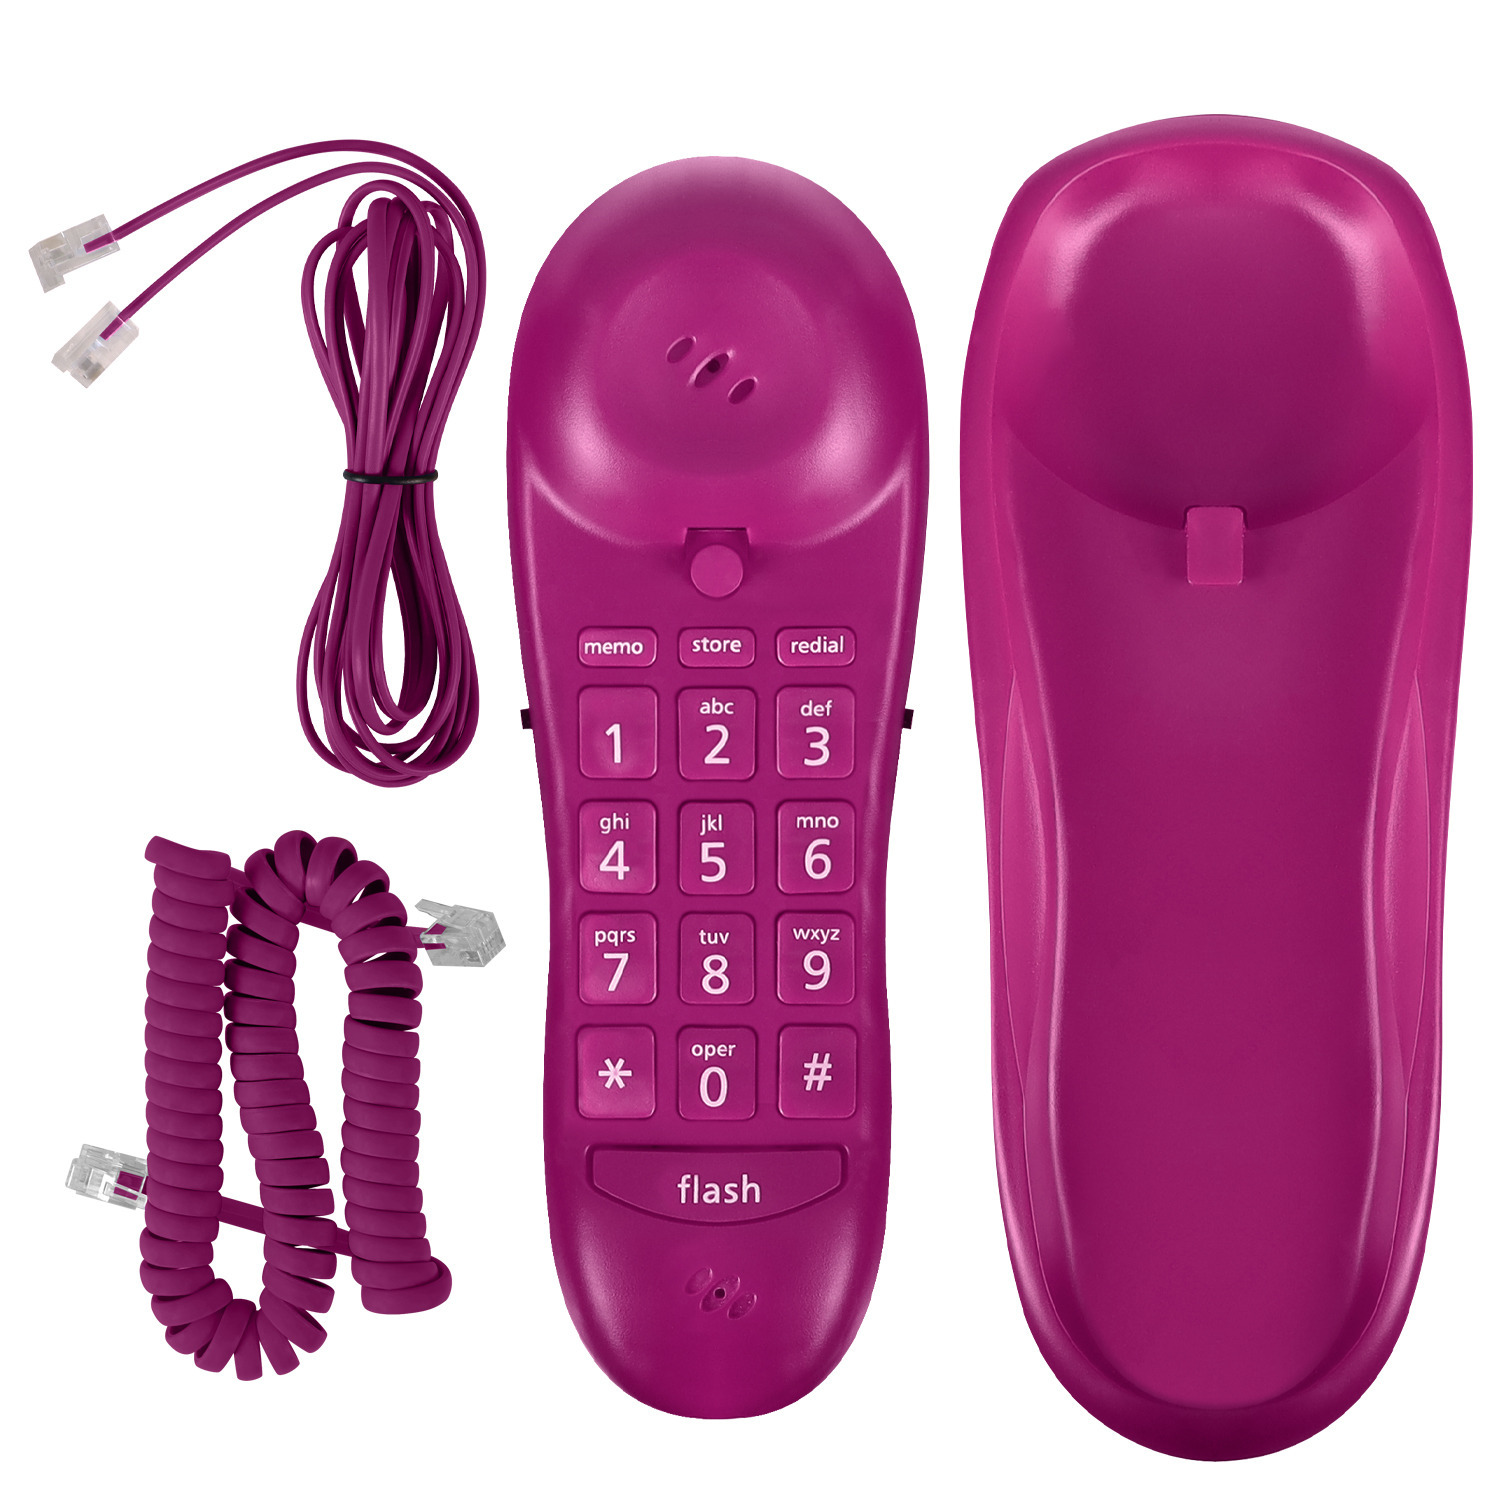 Slimline Purple Colored Phone For Wall Or Desk With Memory